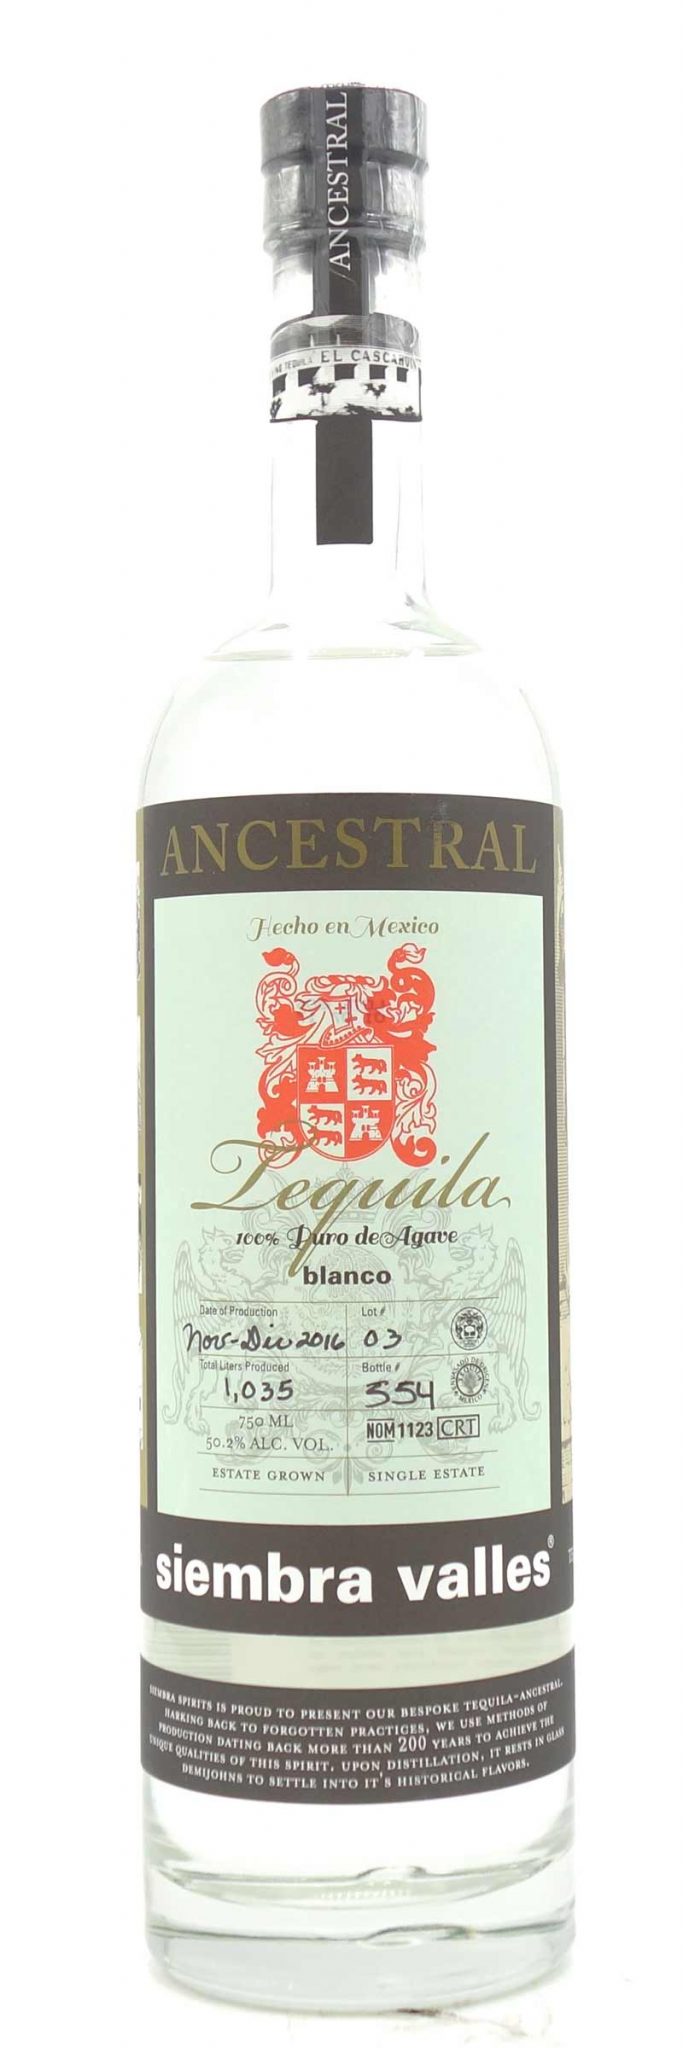 SIEMBRA VALLES ANCESTRAL TEQUILA BLANCO, 100.4 PROOF 750ML